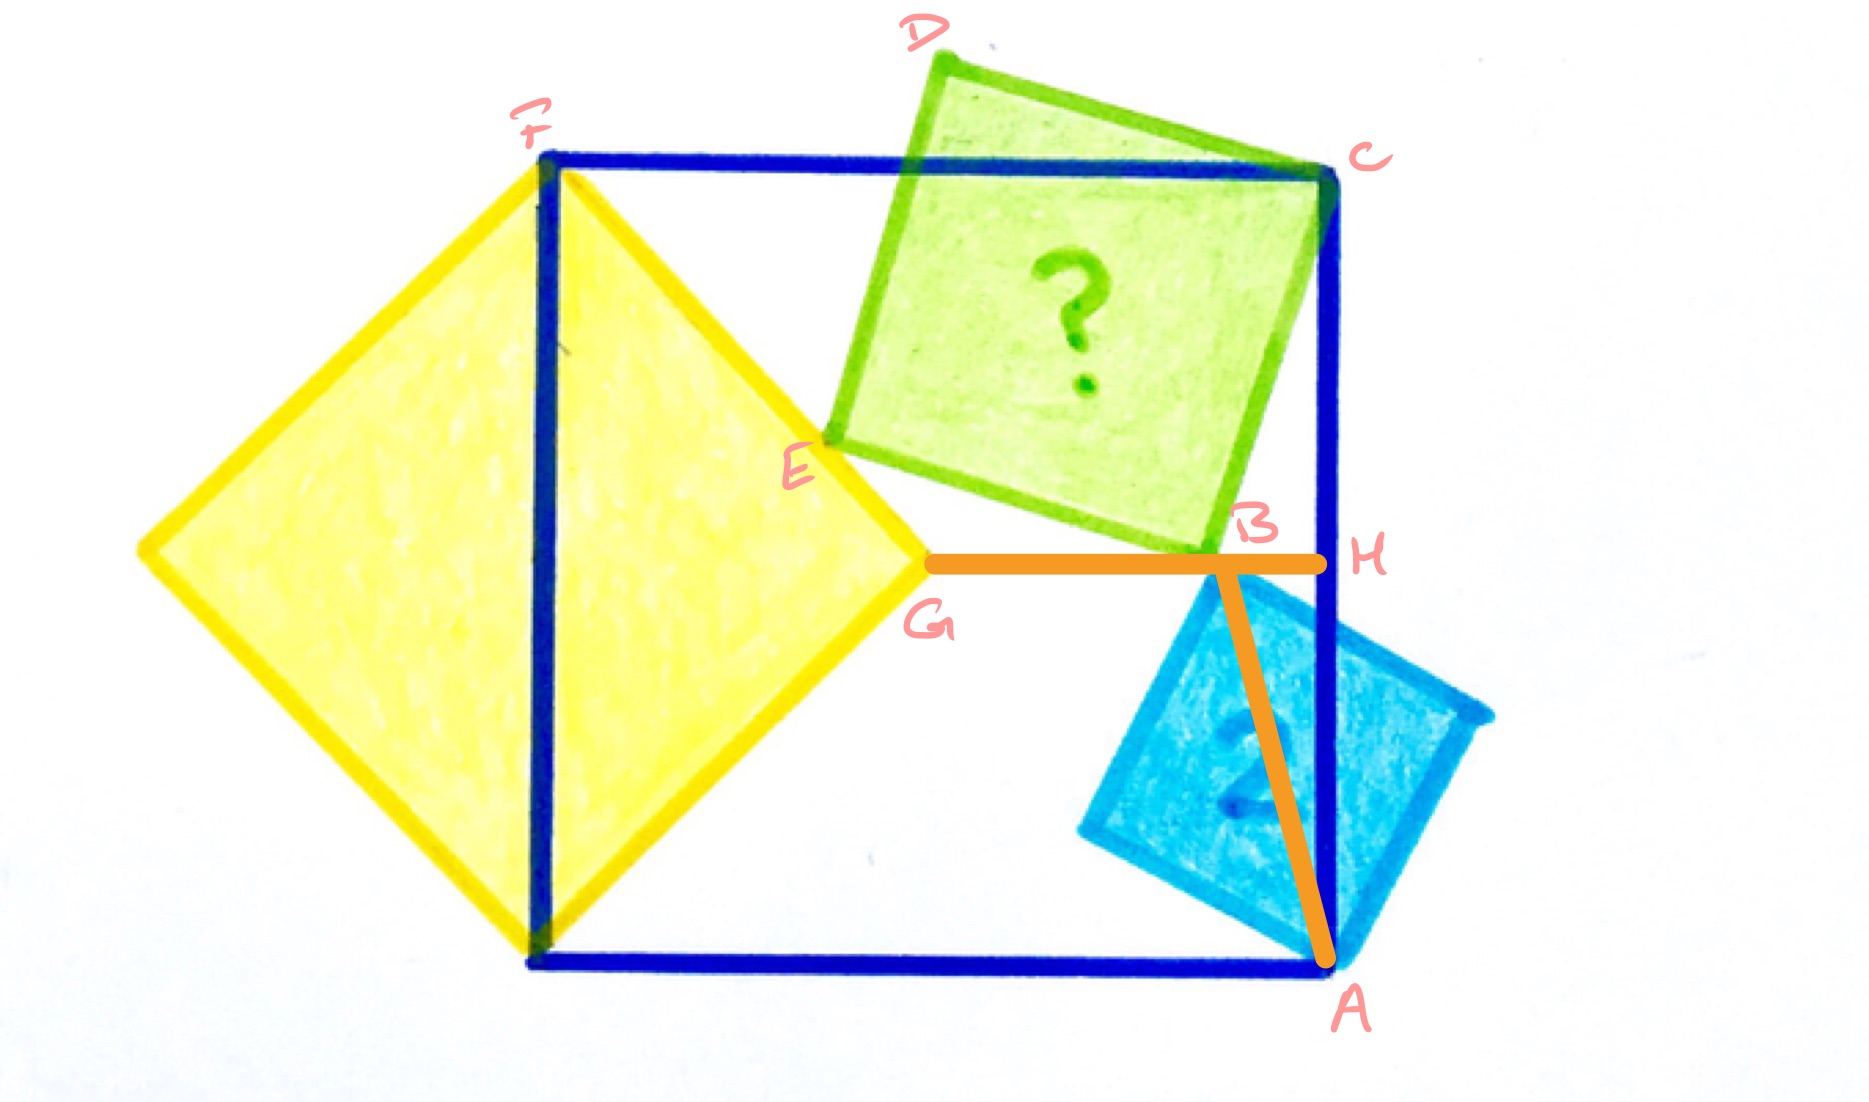 Four squares iii labelled